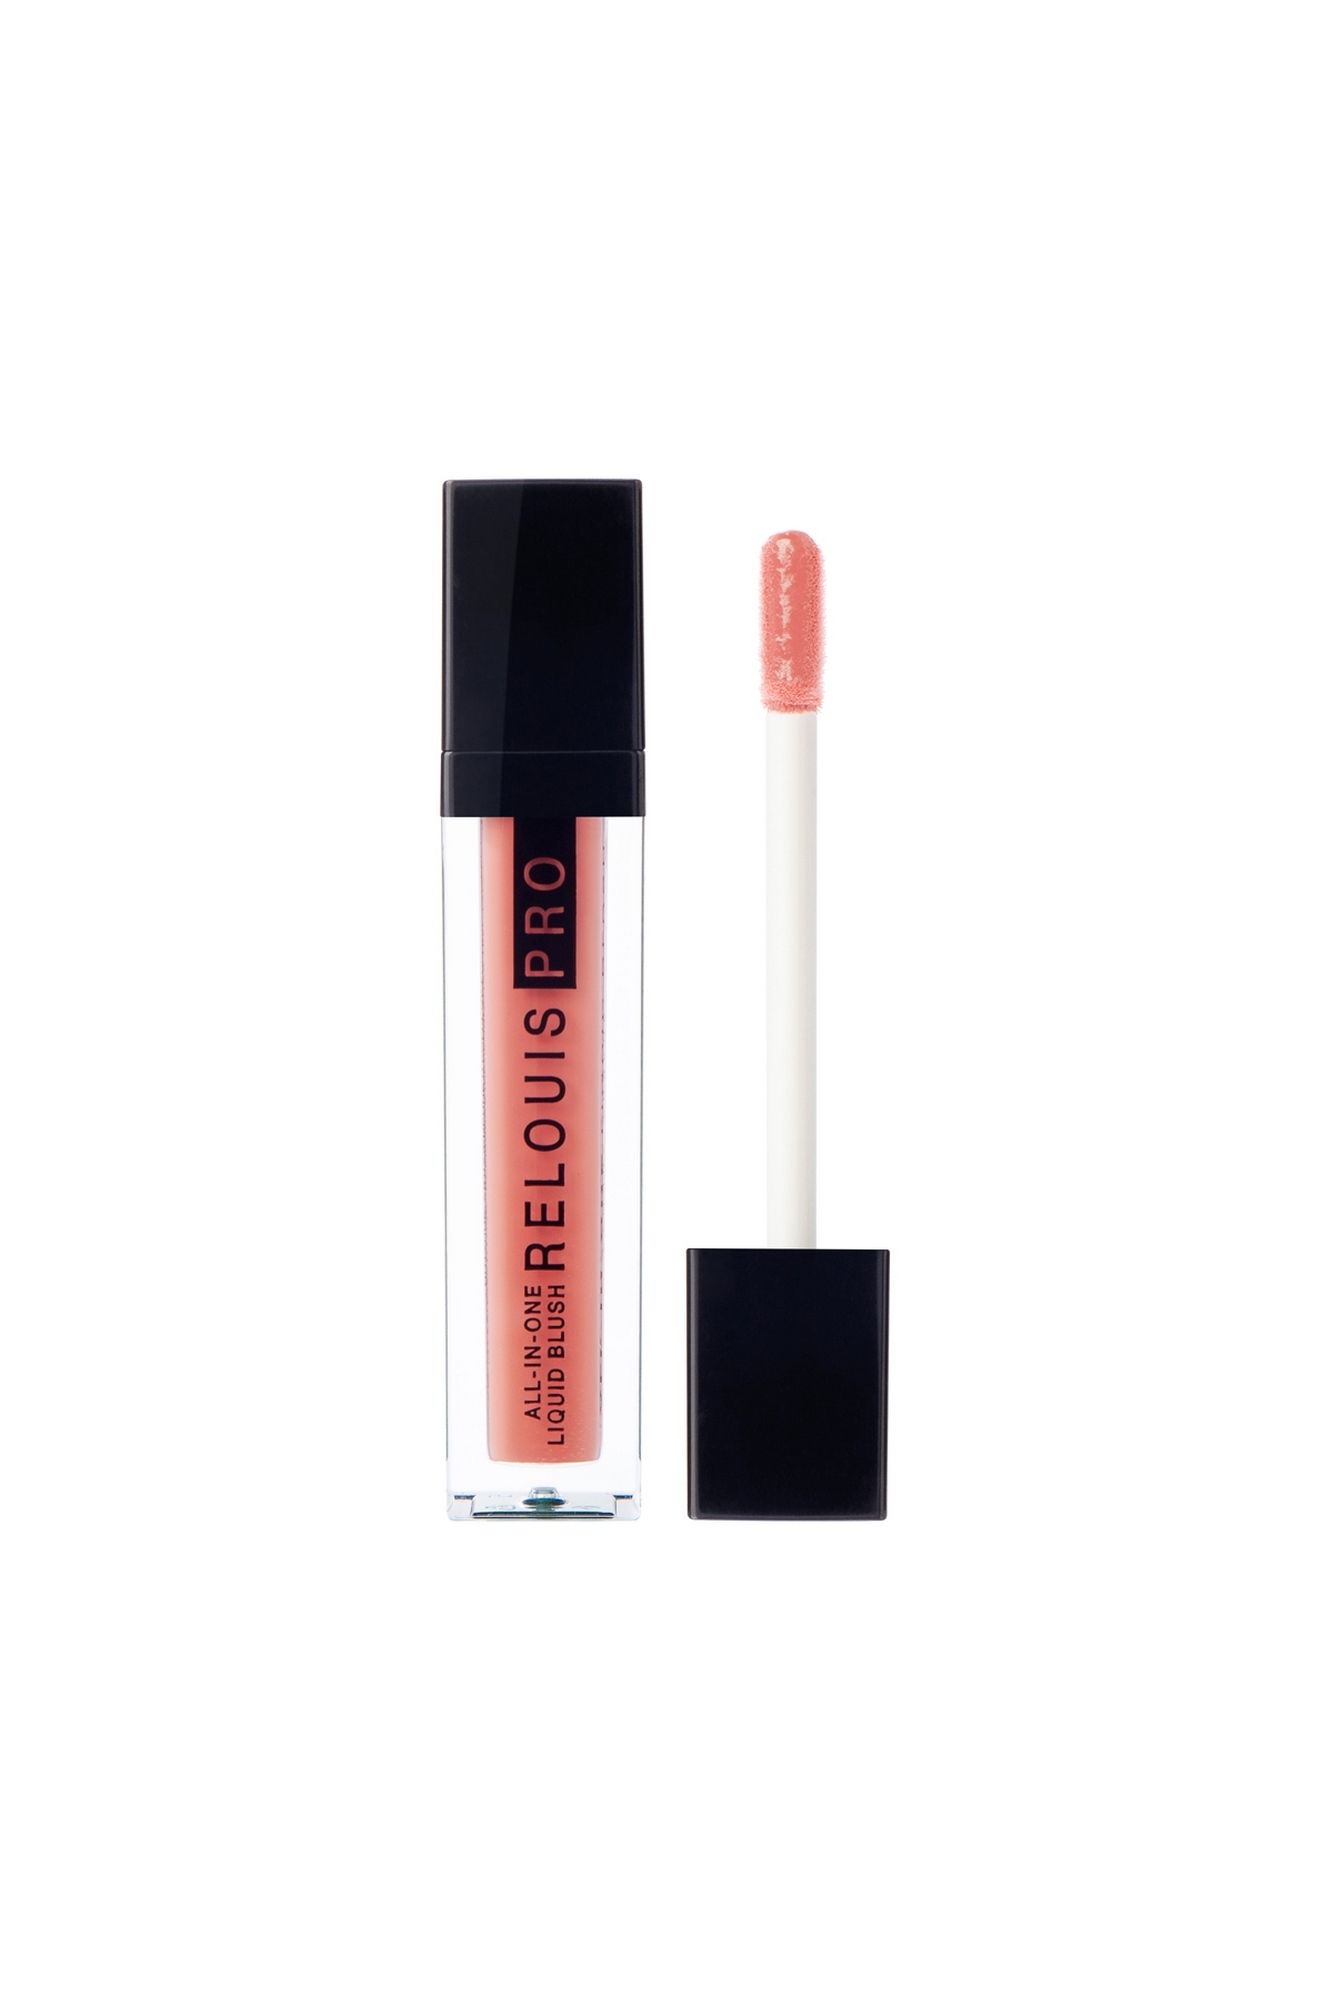 Румяна Relouis RELOUIS_PRO_All-In-One_Liquid_Blush тон:01, coral